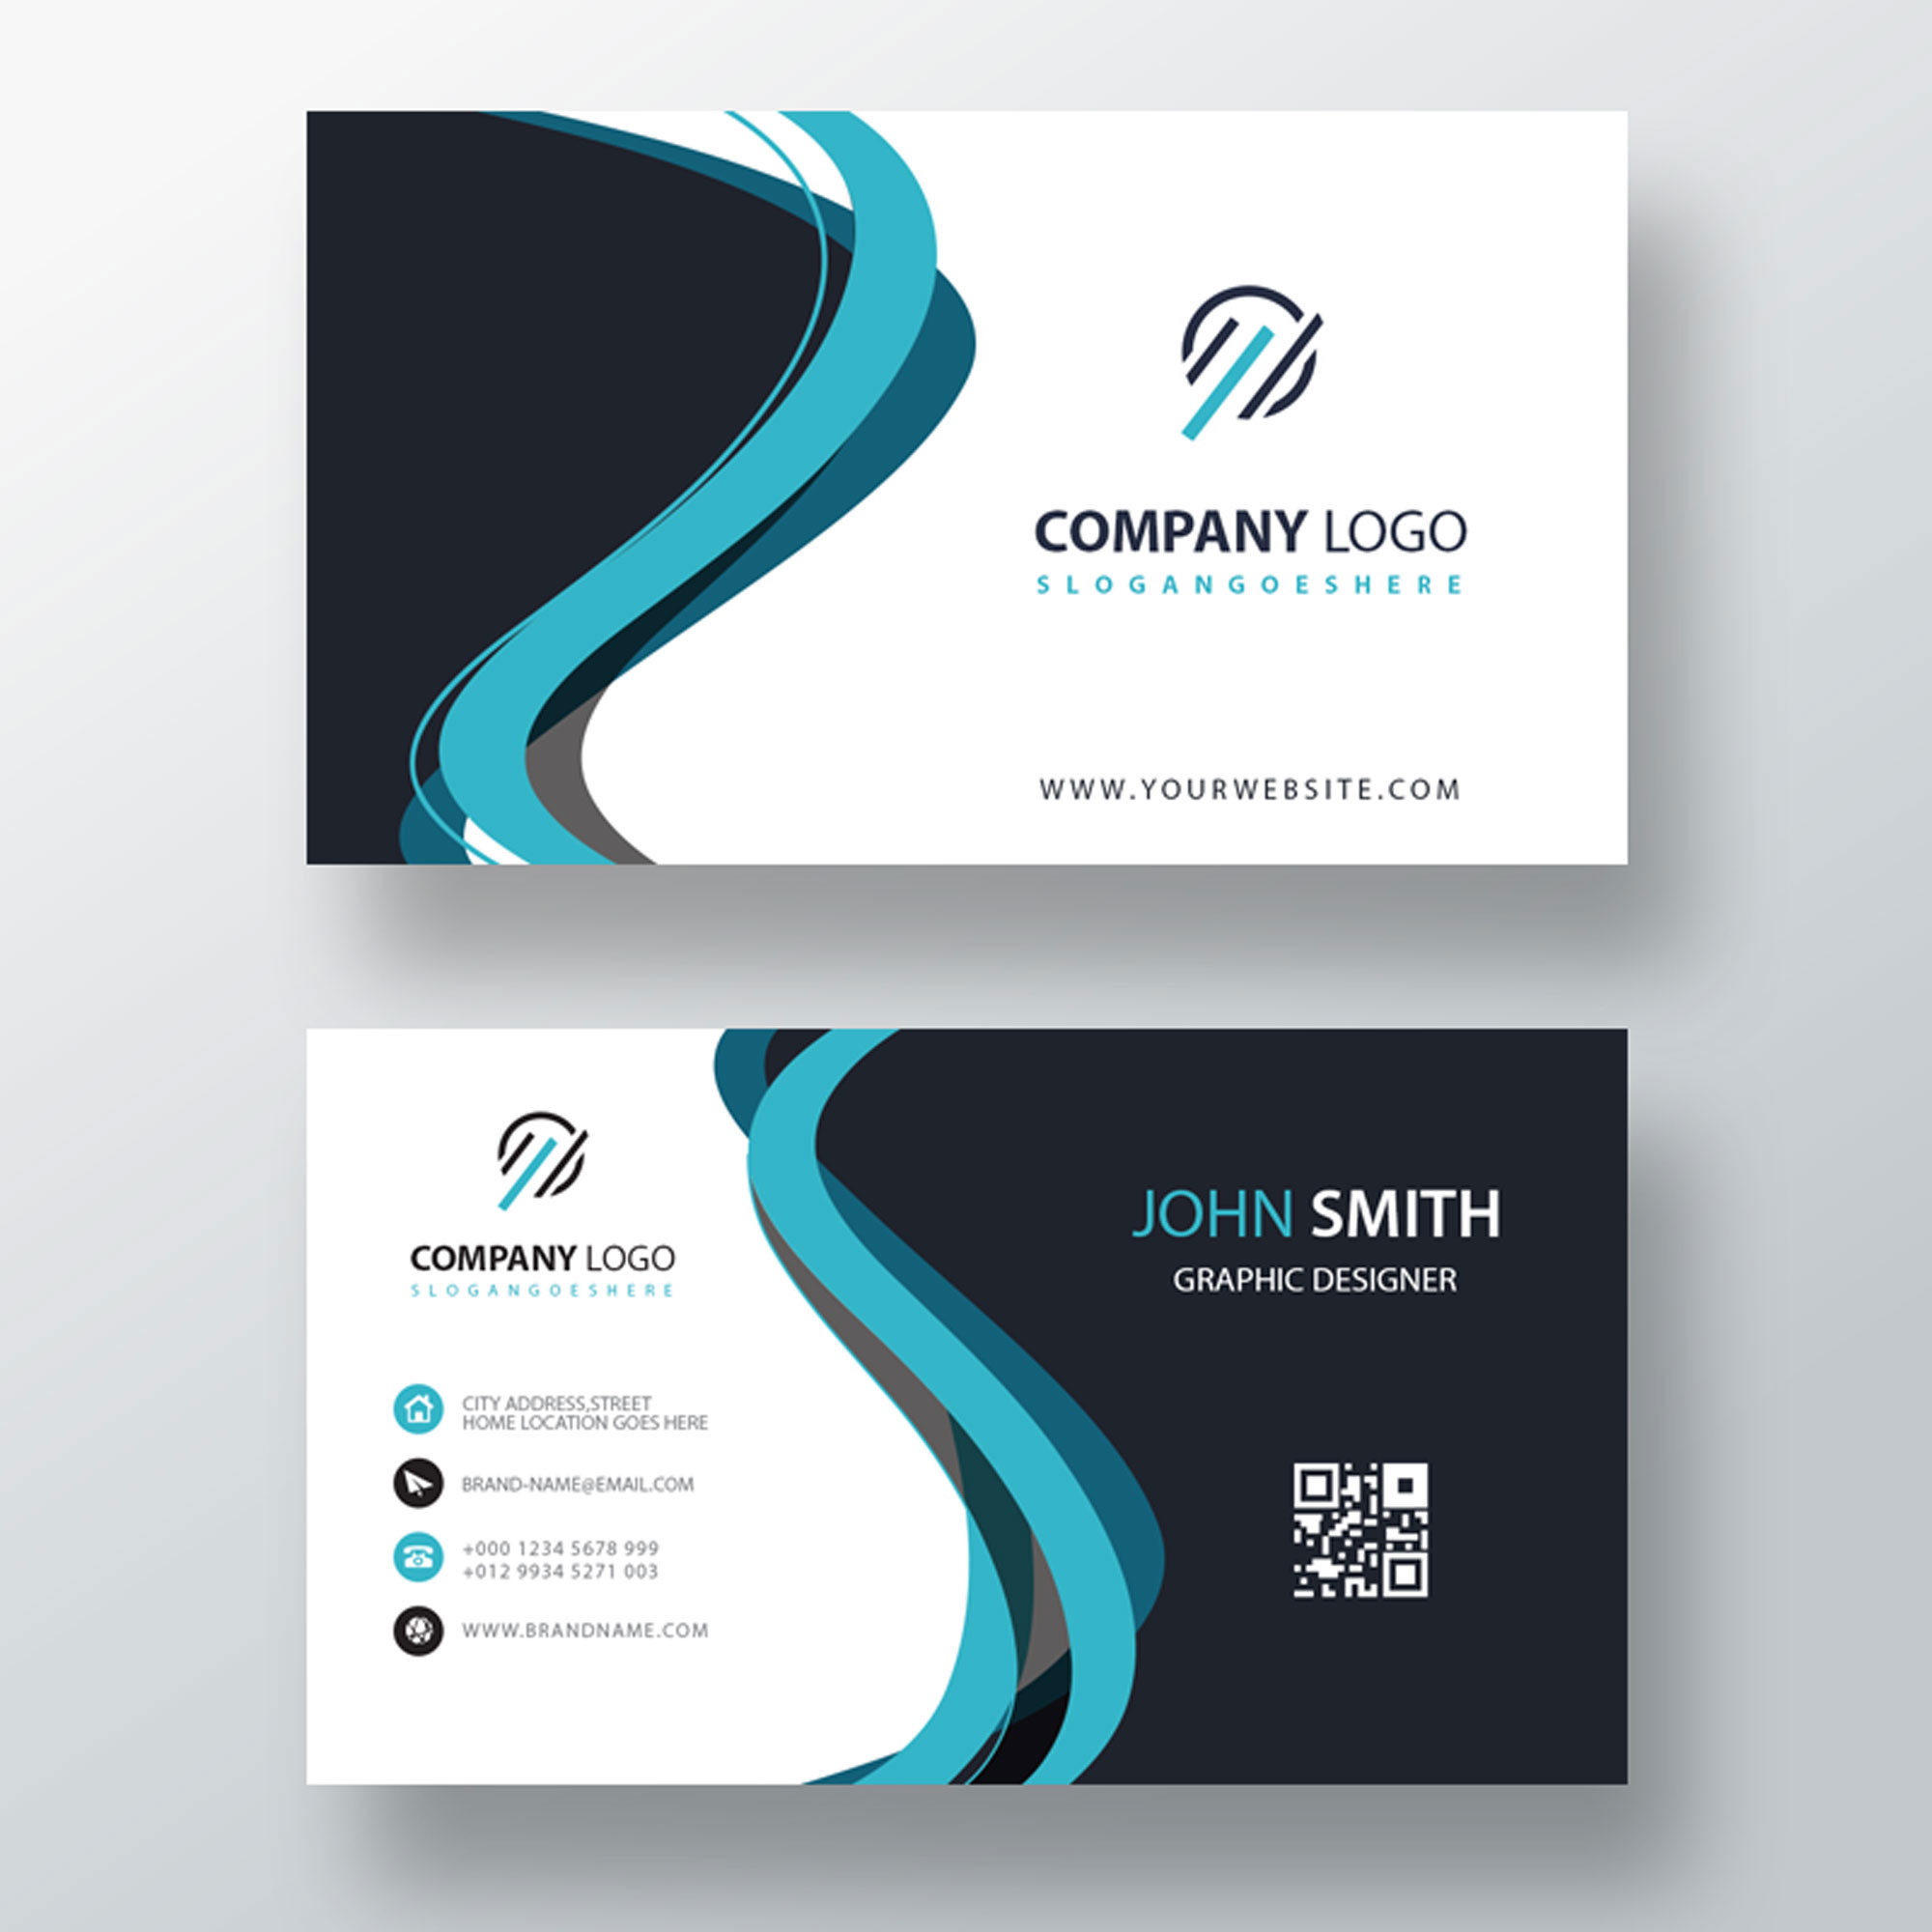 Classic Company Visiting Card Template | Free Customize Within Buisness Card Template